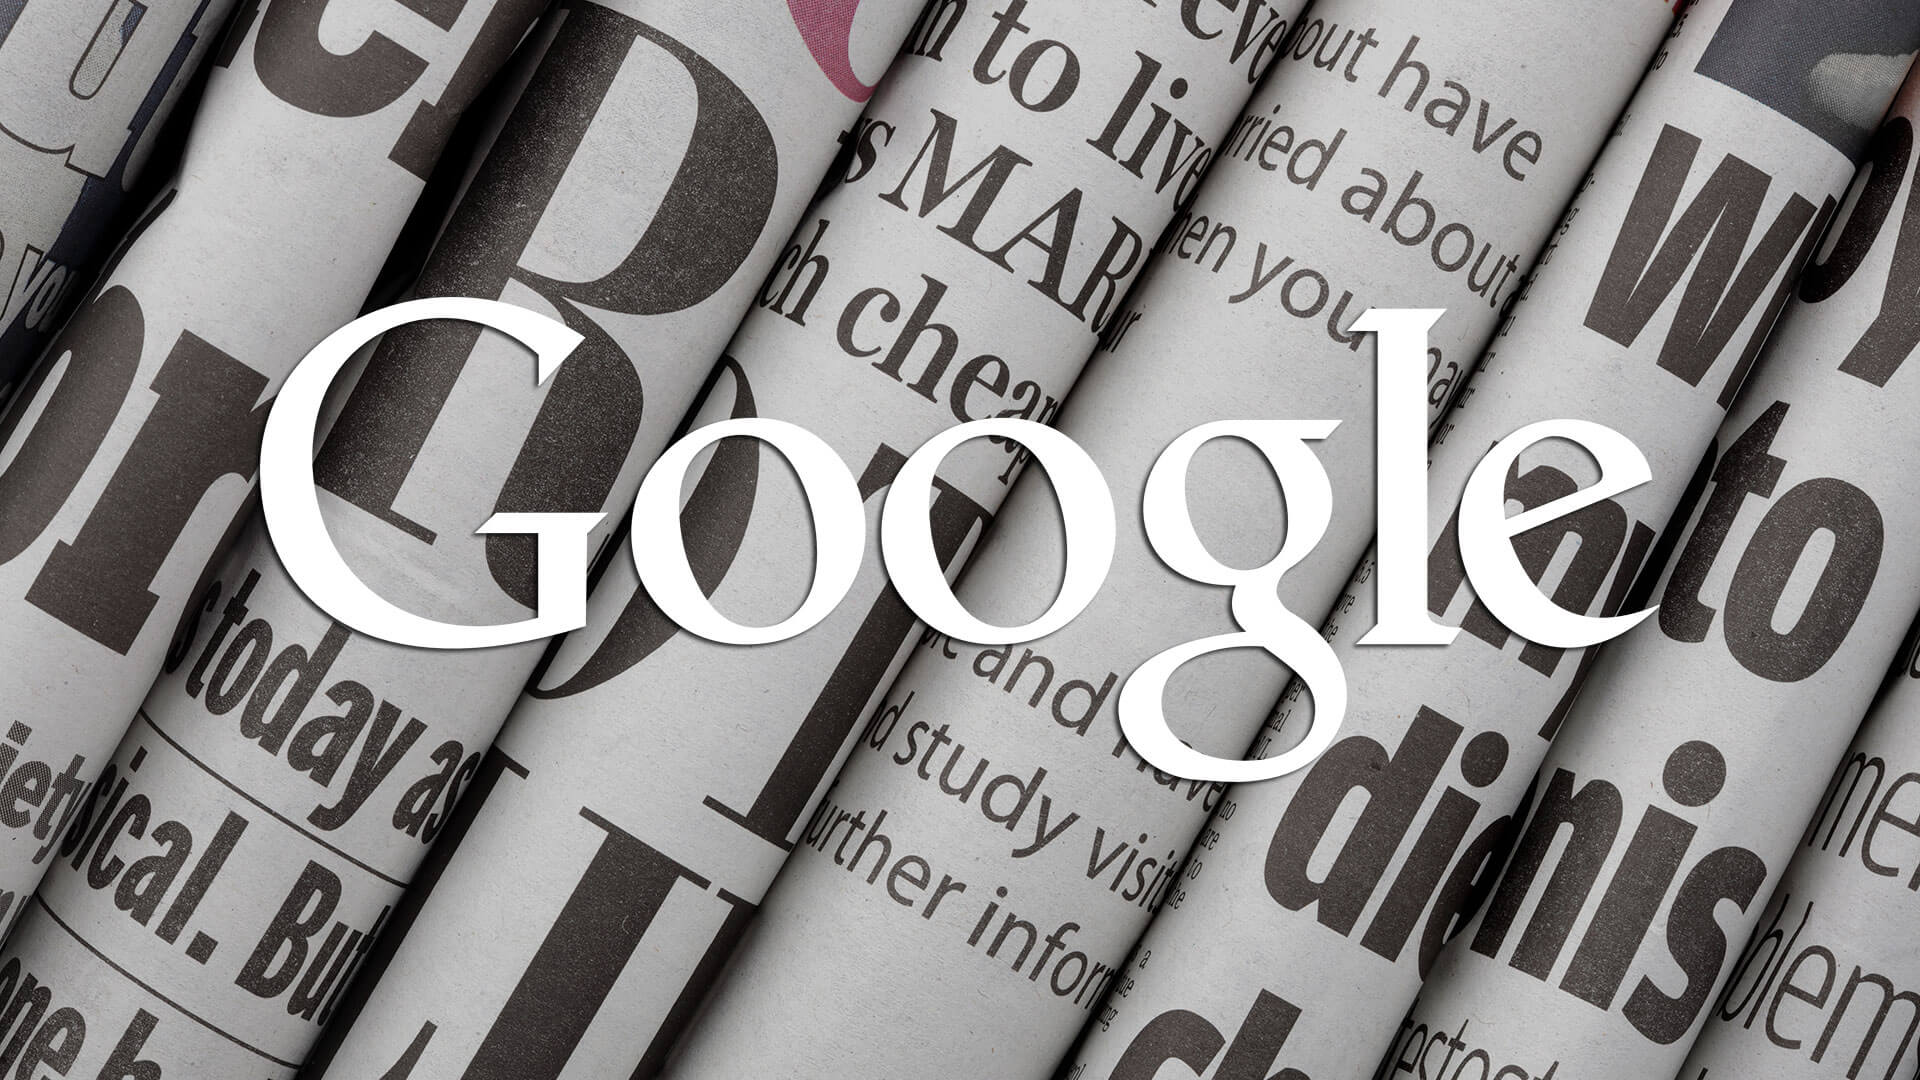 Newspapers Lobby Trump About Google News